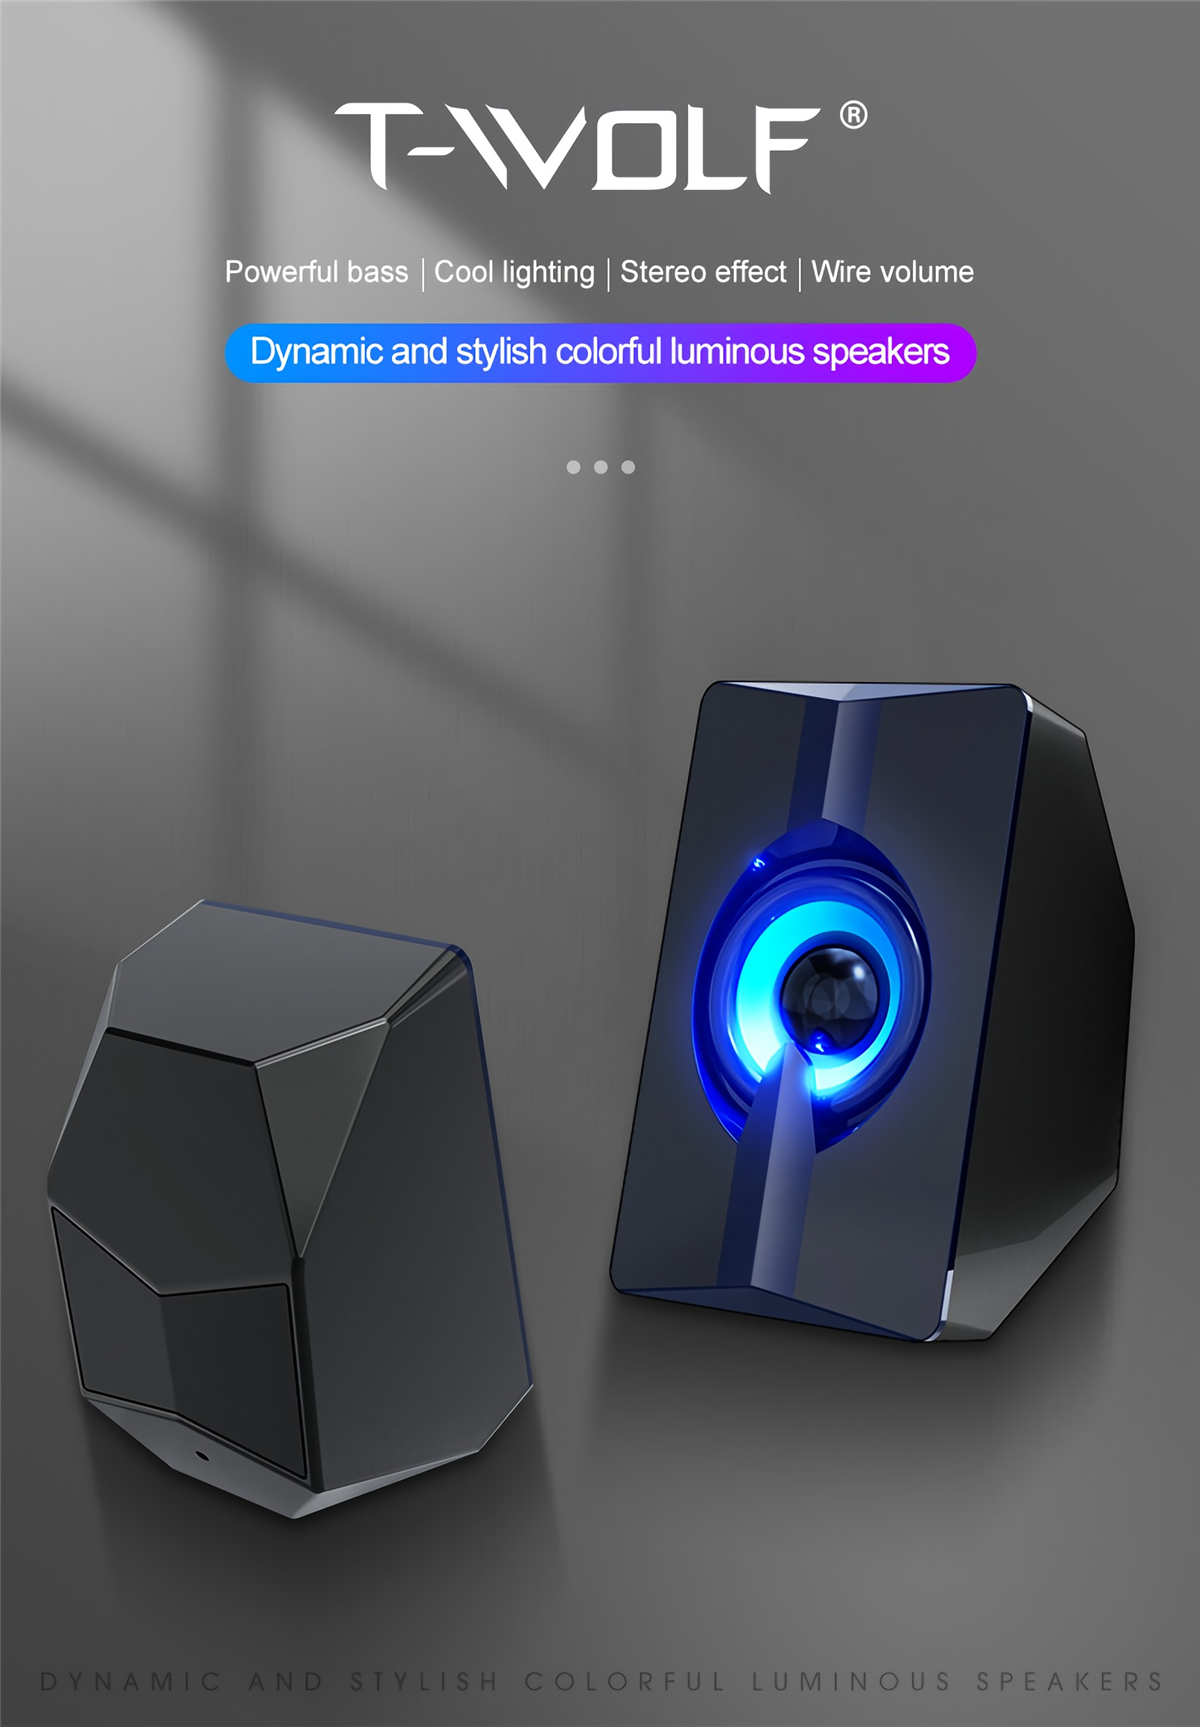 T-WOLF-S5-Colorful-Luminous-Speaker-4D-Surround-Sound-Wired-Computer-Speaker-Gaming-Loudspeaker-for--1850667-1